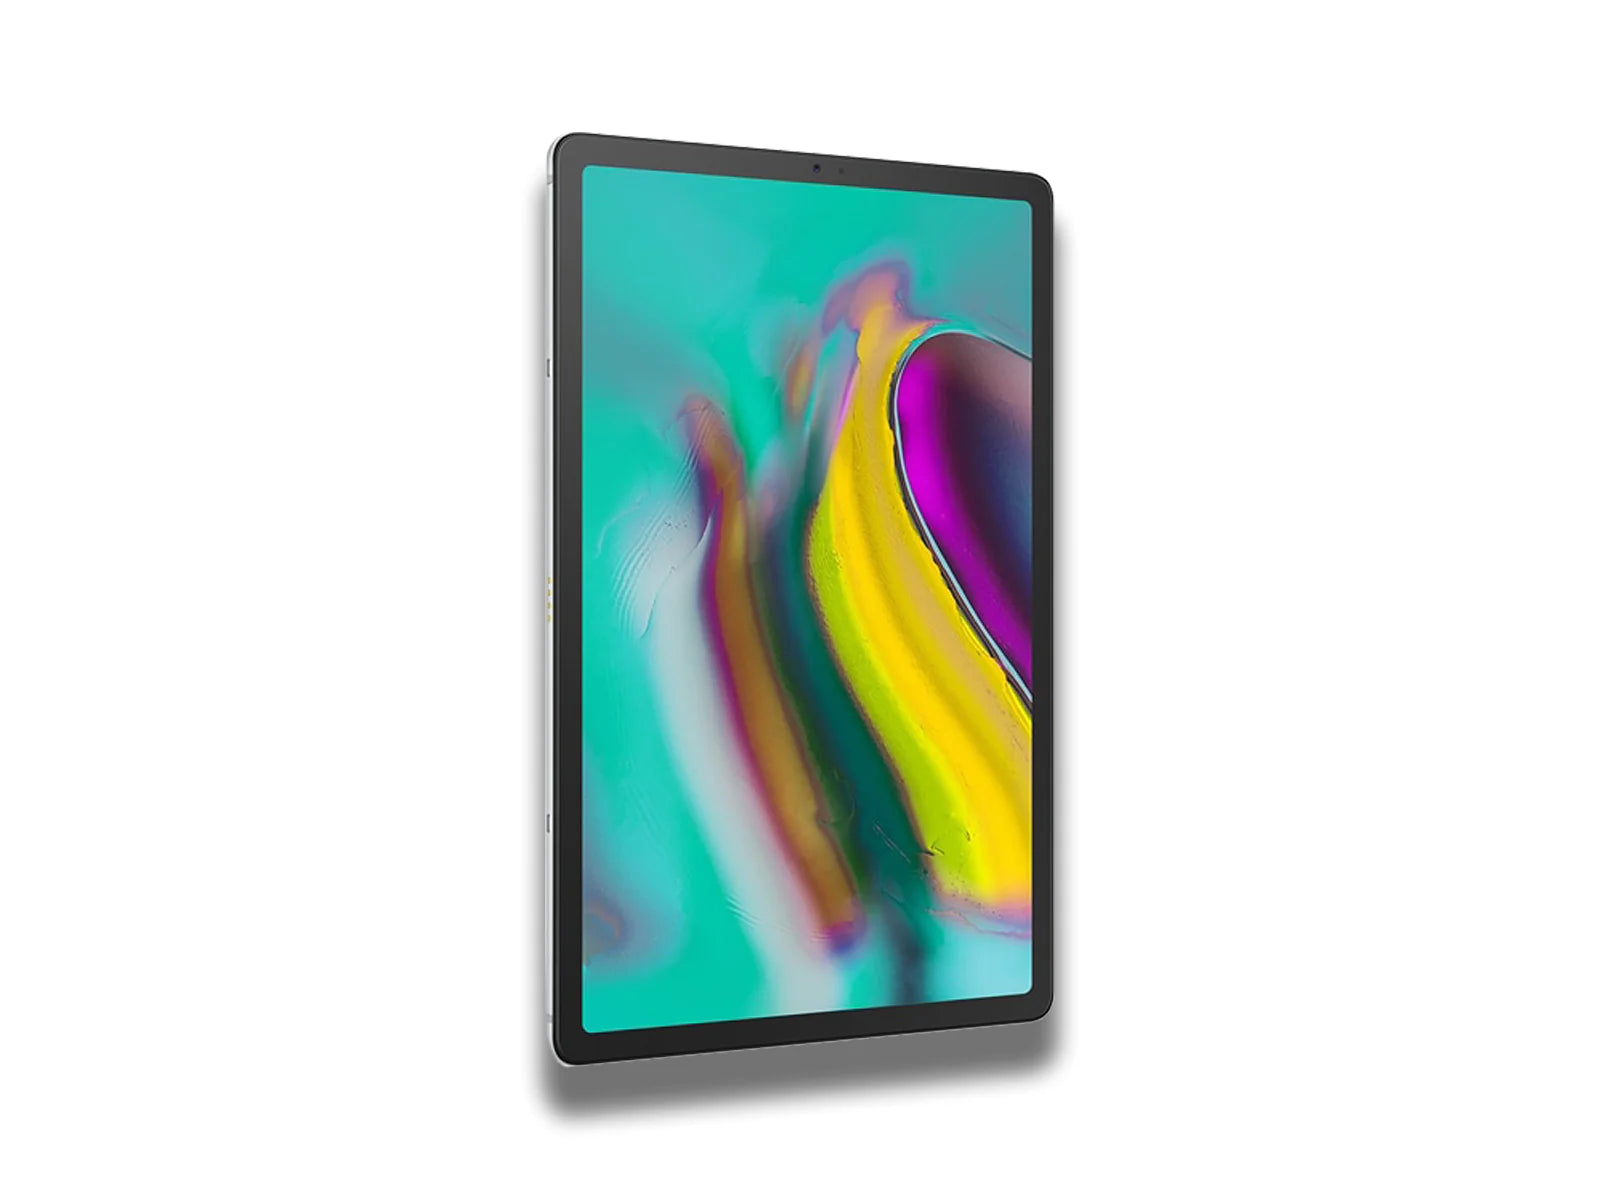 Samsung Galaxy Tab S5E LTE Front View Showing The Screen